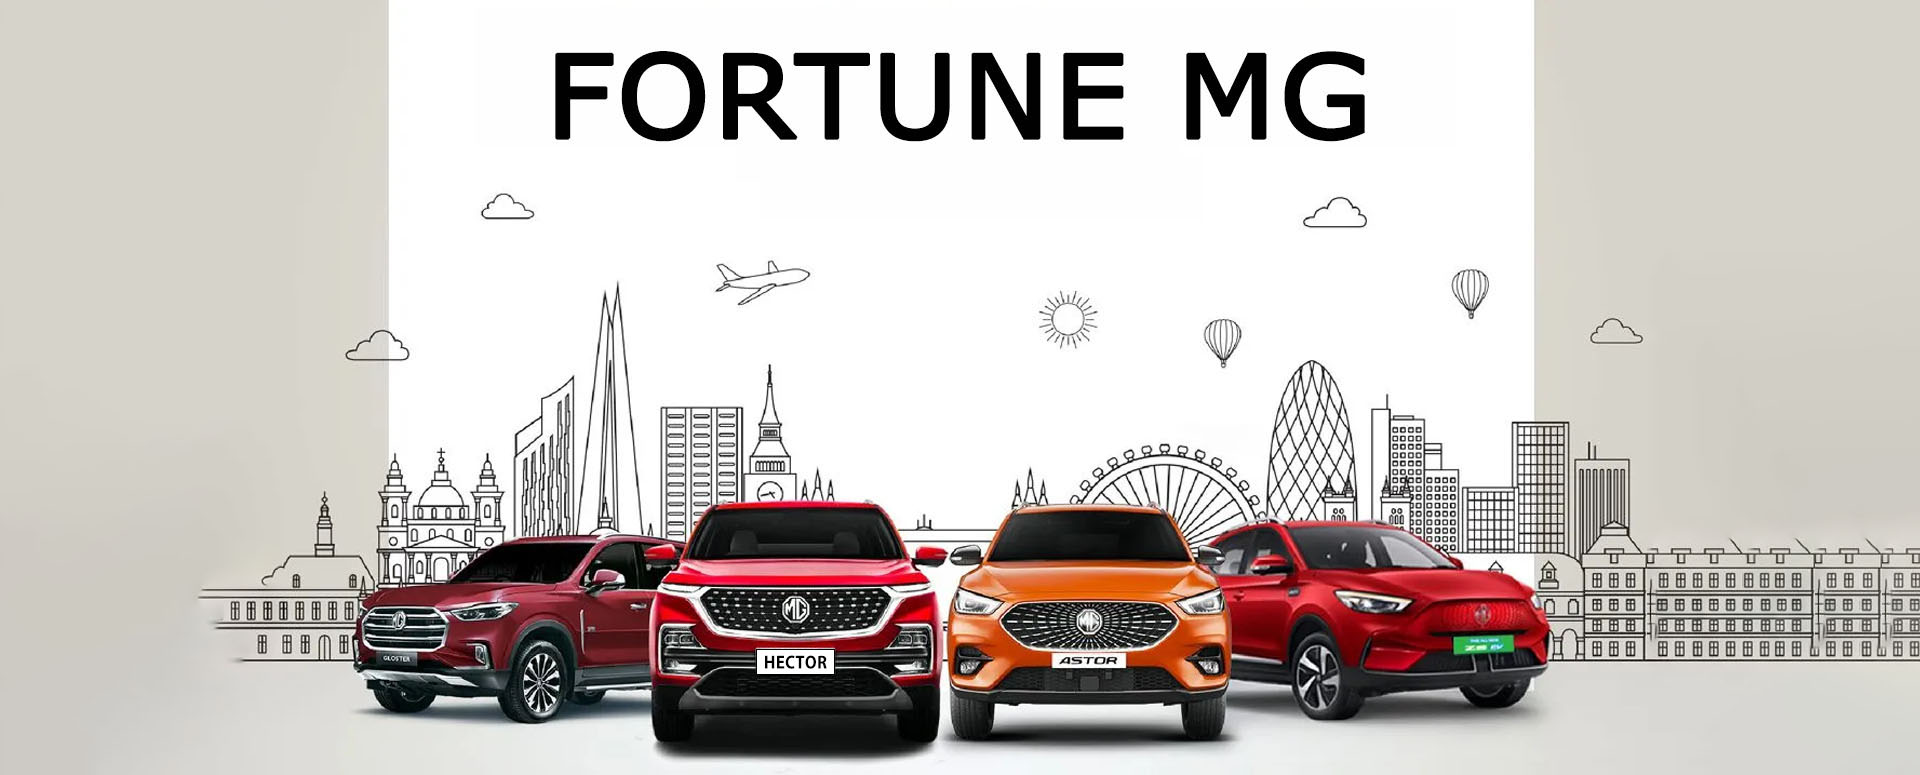   Fortune MG